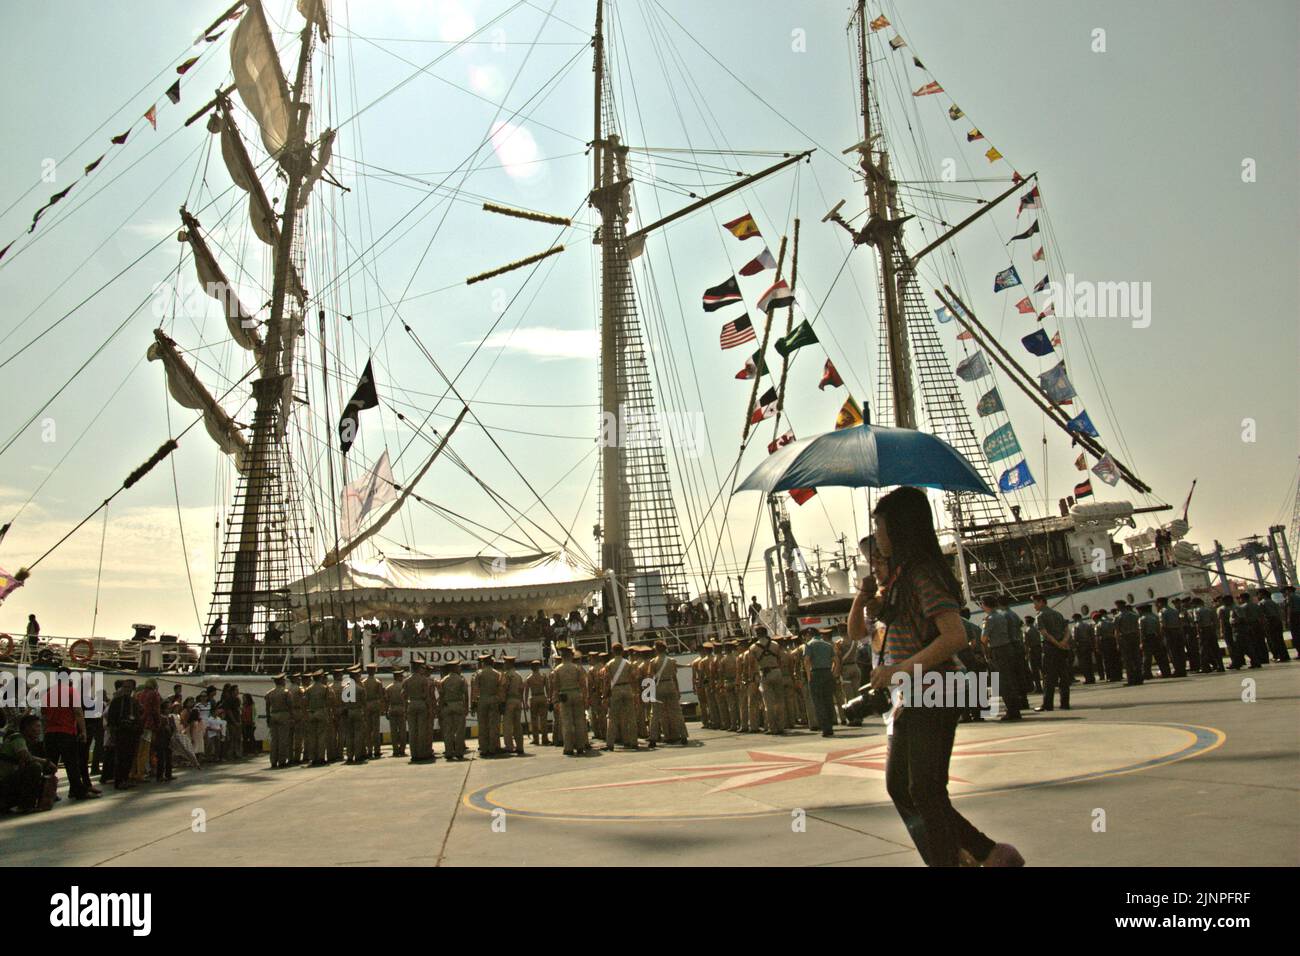 Young women carrying an umbrella and a camera, as they are walking on the dock, in a background of KRI Dewaruci (Dewa Ruci), an Indonesian tall ship, that is being opened for public visitors at Kolinlamil harbour (Navy harbour) in Tanjung Priok, North Jakarta, Jakarta, Indonesia. Stock Photo